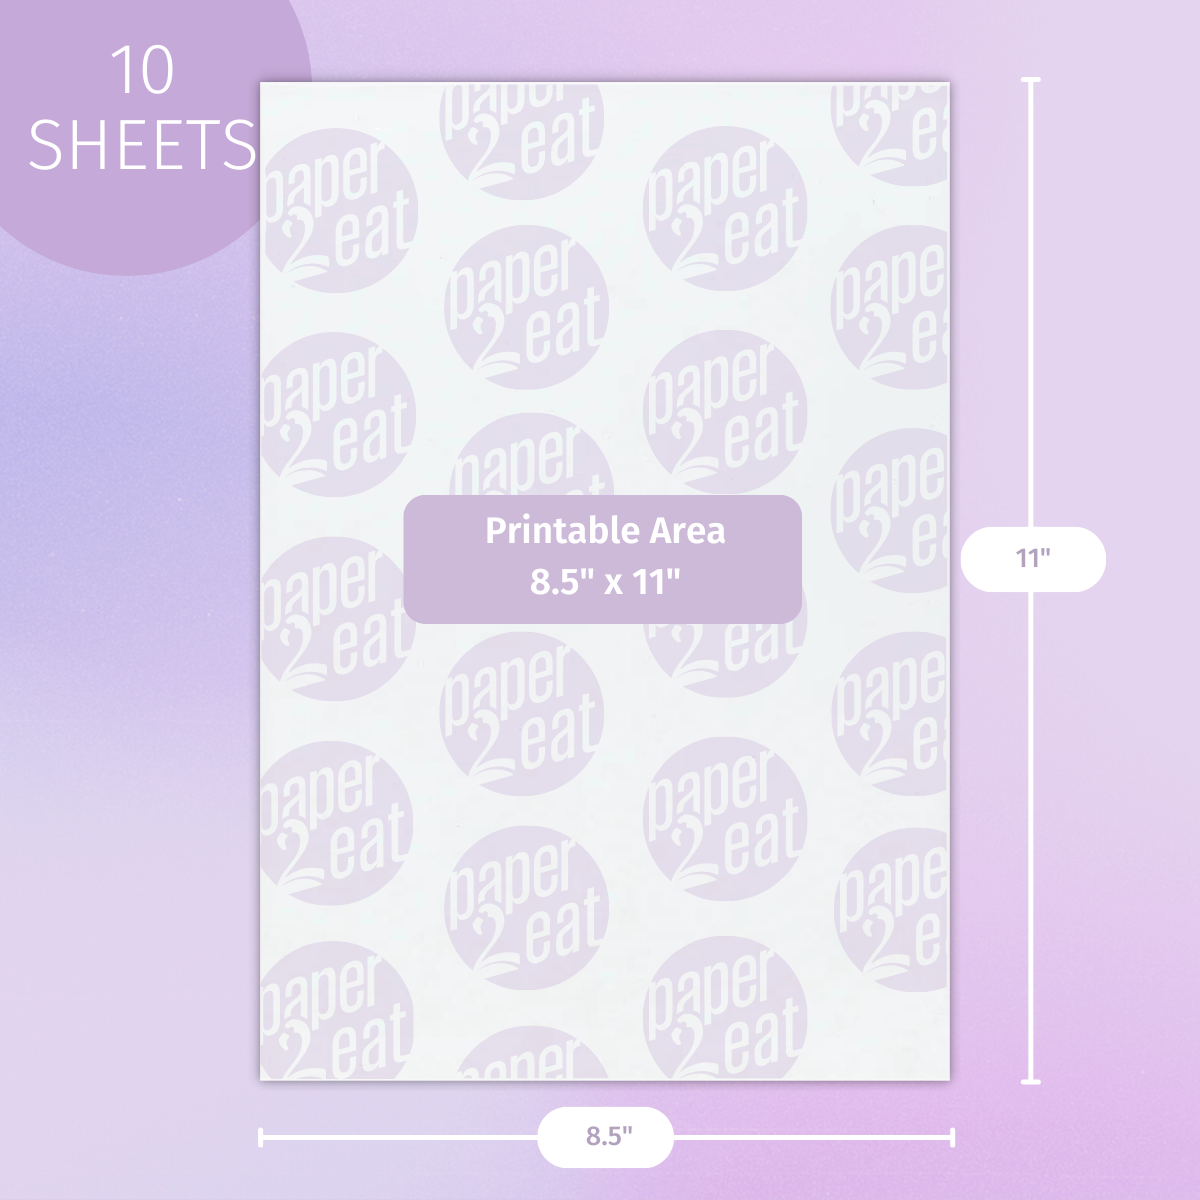 Miracle Transfer Sheets - 10 Count